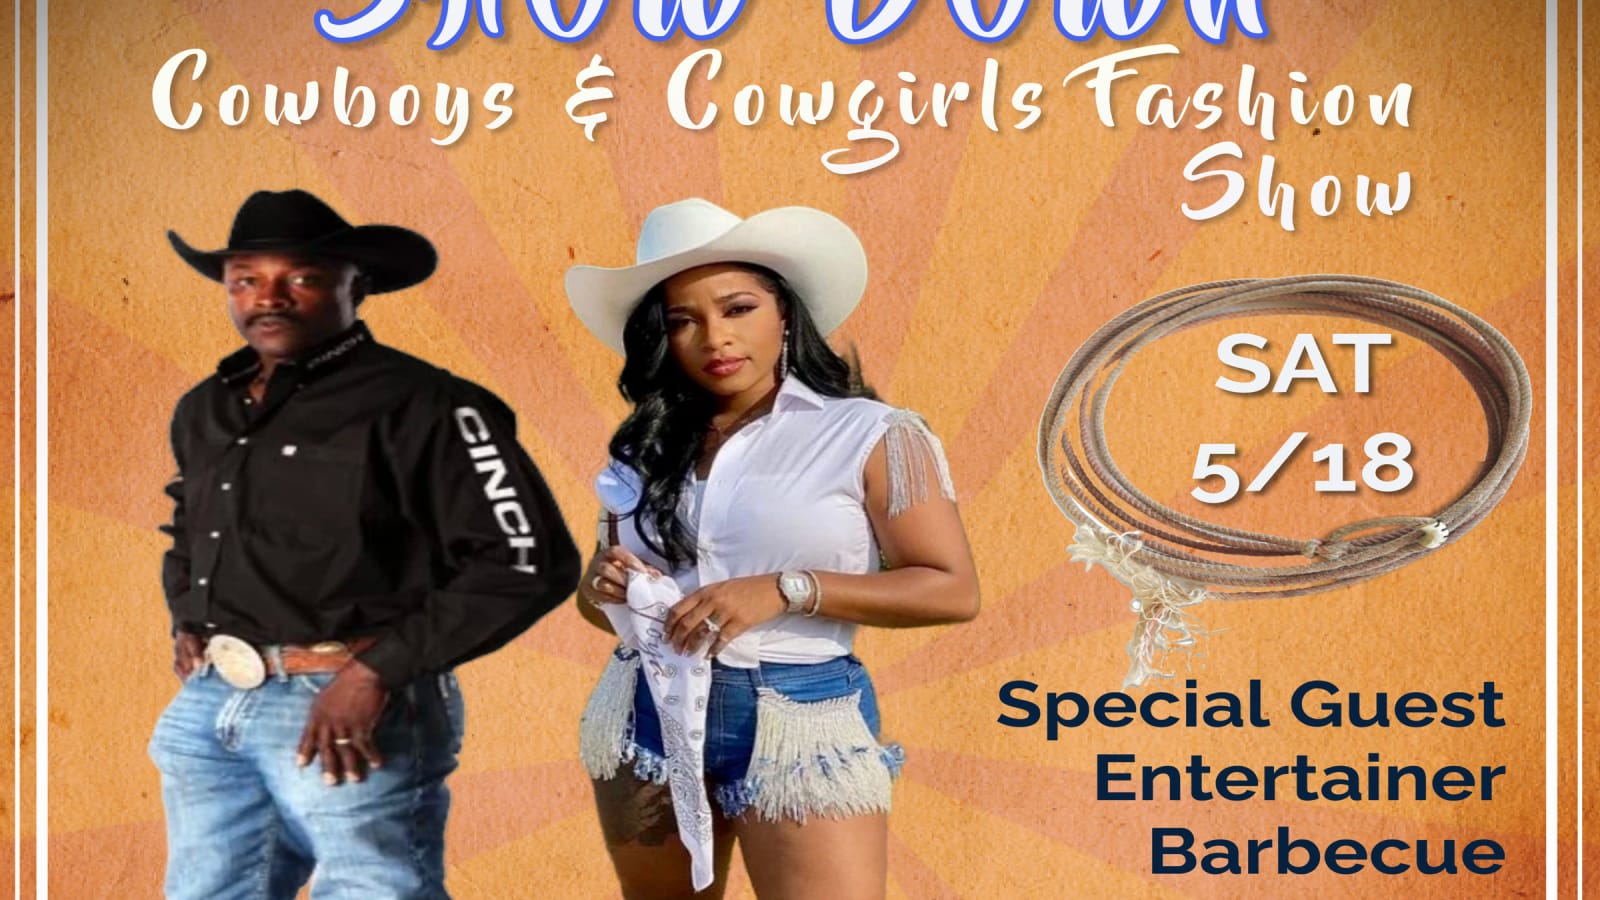 Country Western Fashion Show